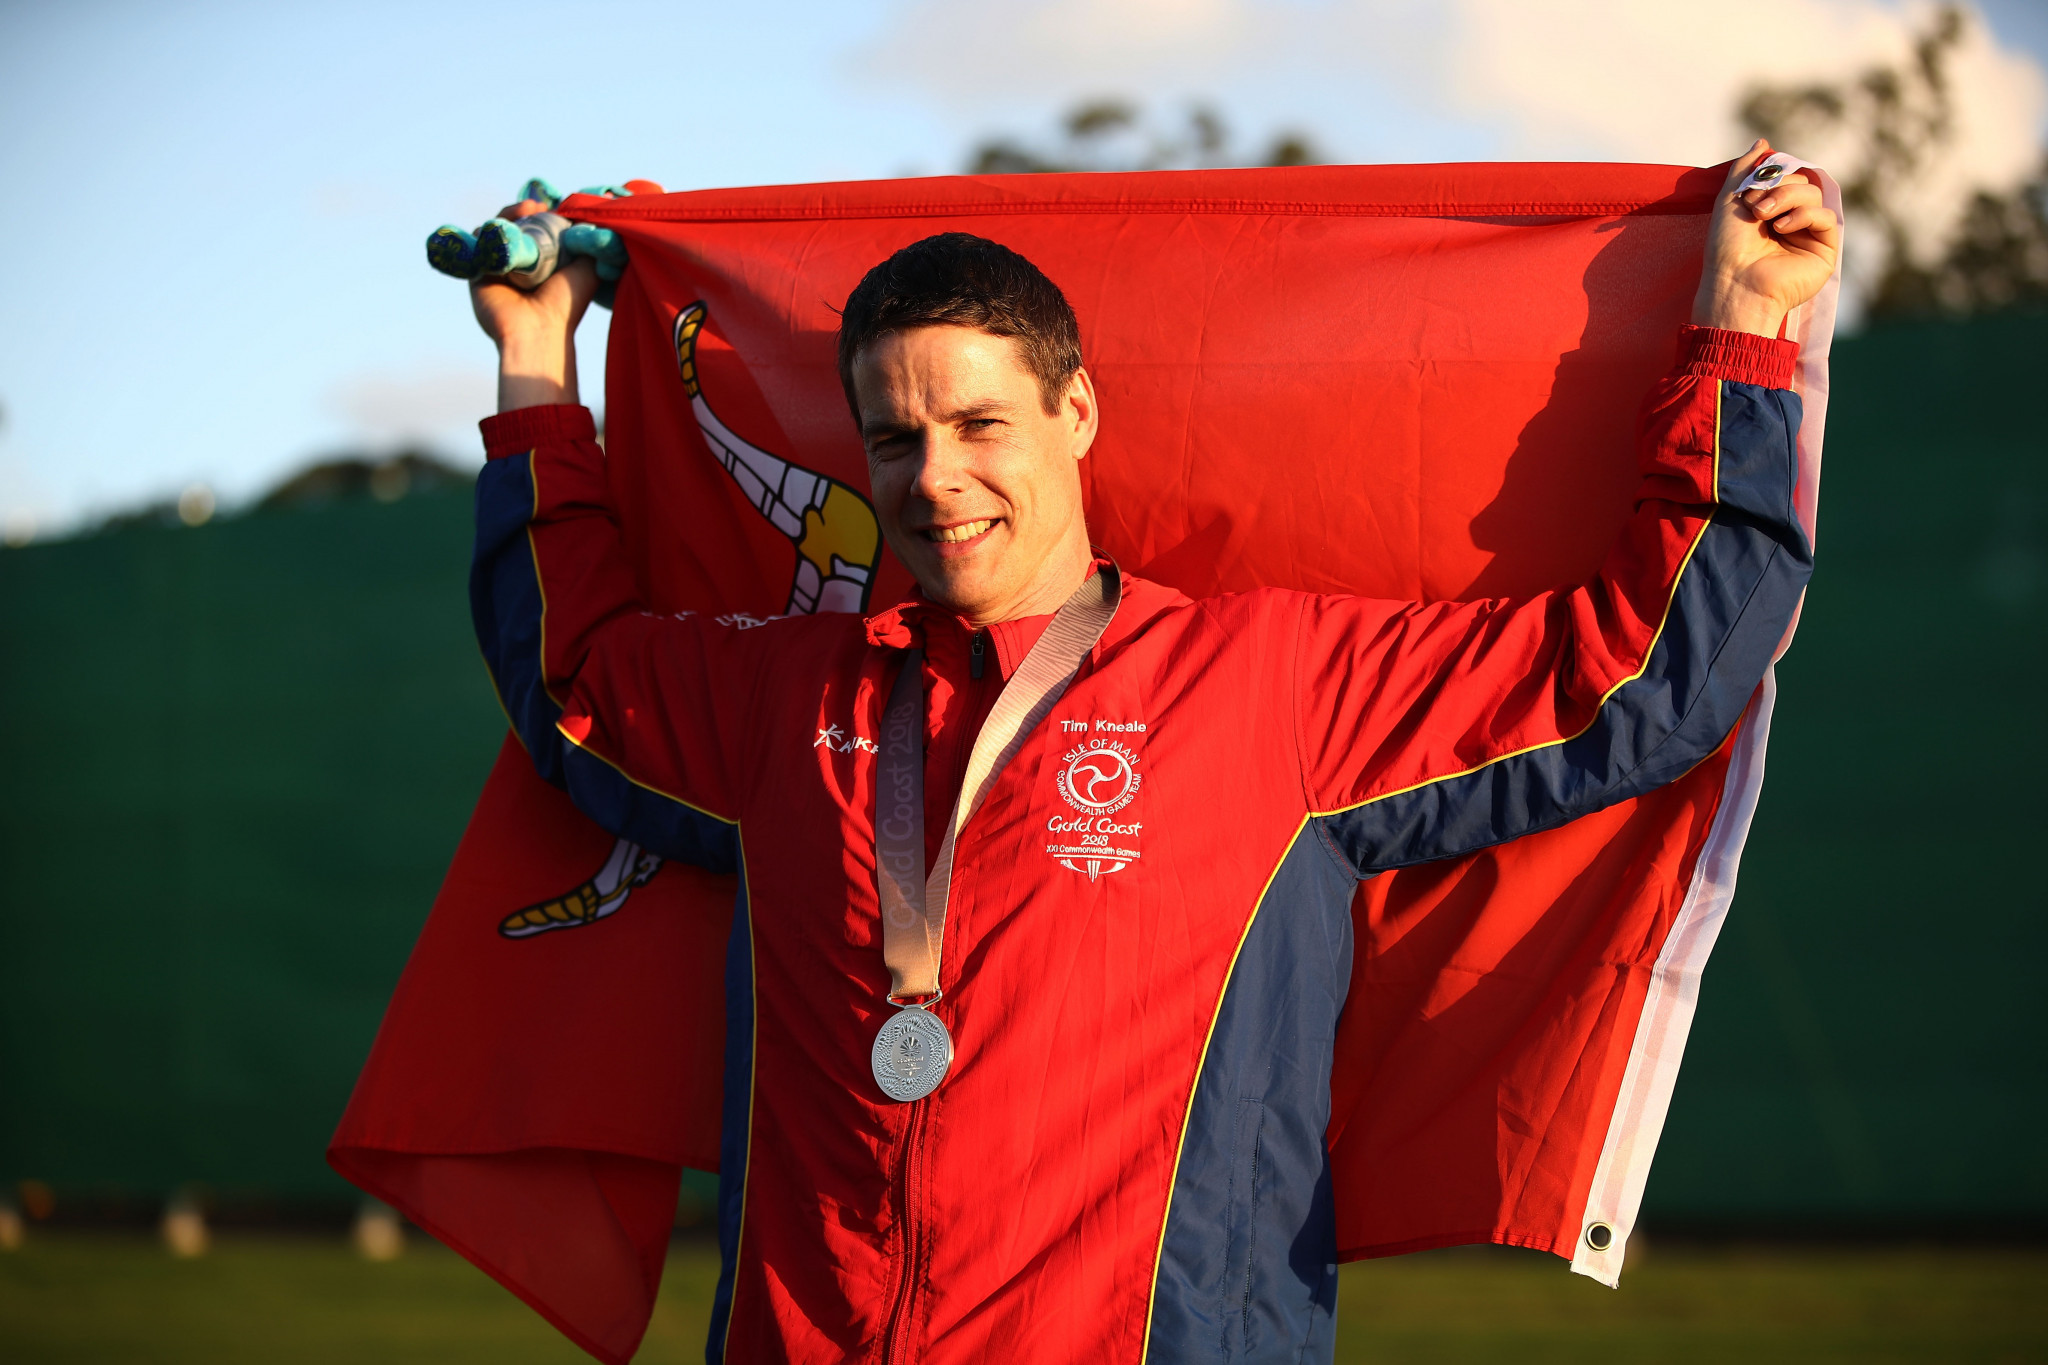 Commonwealth Games silver medallist honoured at Isle of Man sports awards